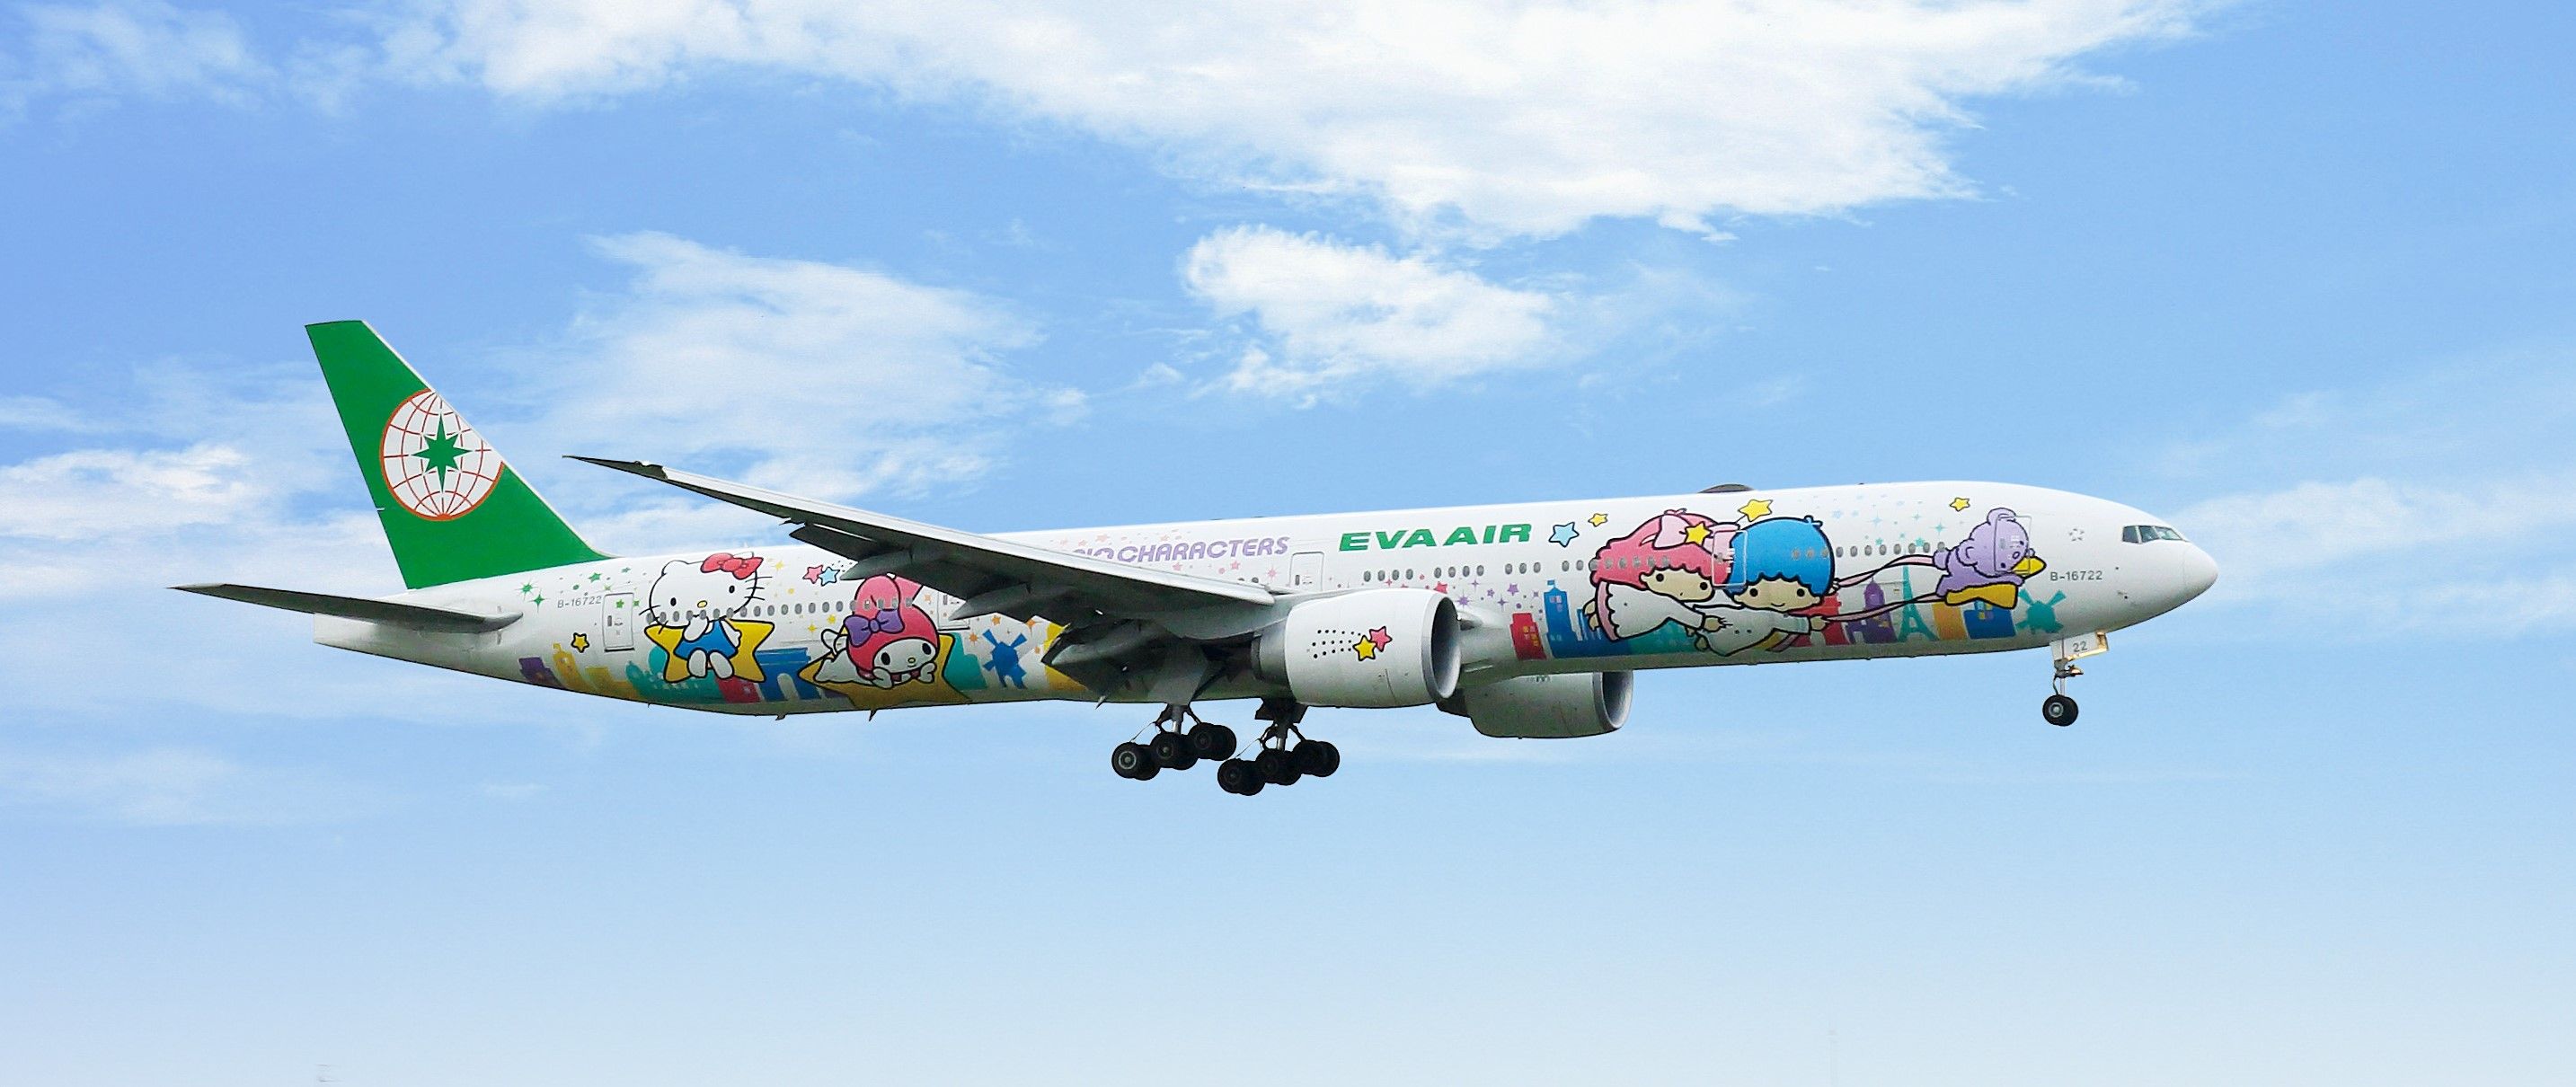 HAECO Landing Gear Services signs new 10-year contract with EVA Air_2.jpg